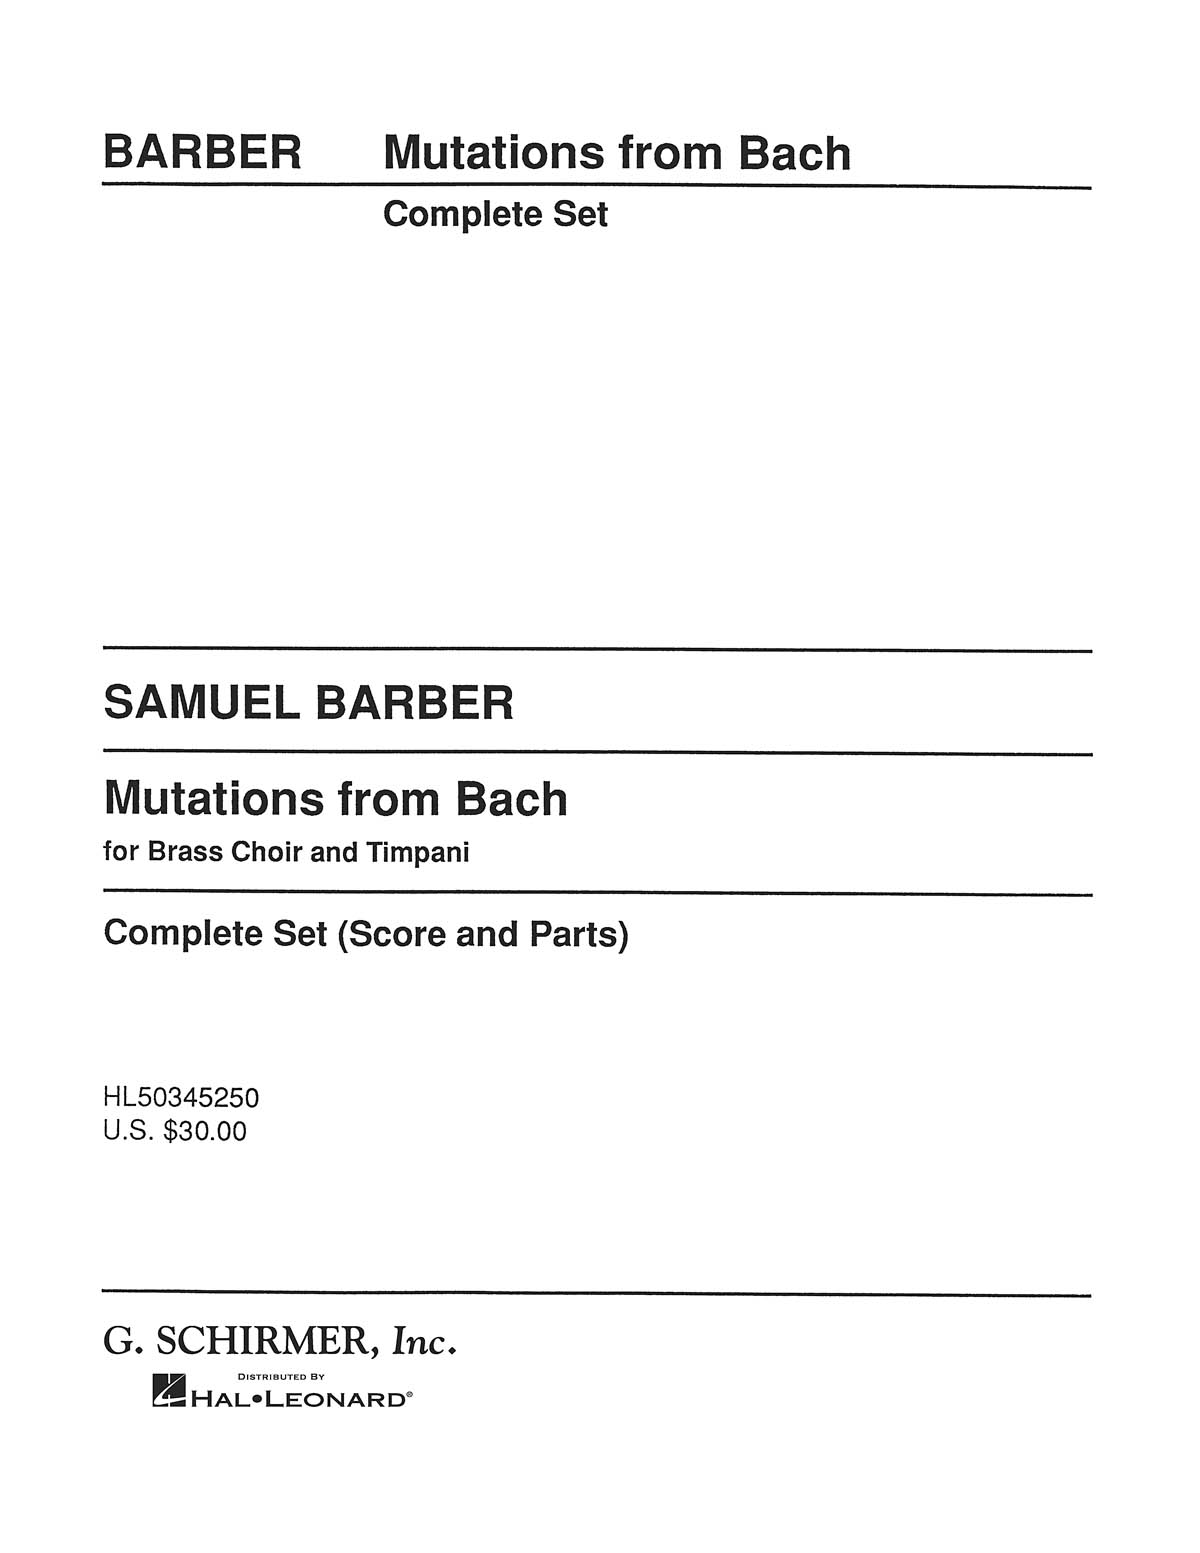 Samuel Barber: Mutations from Bach: Brass Ensemble: Score and Parts